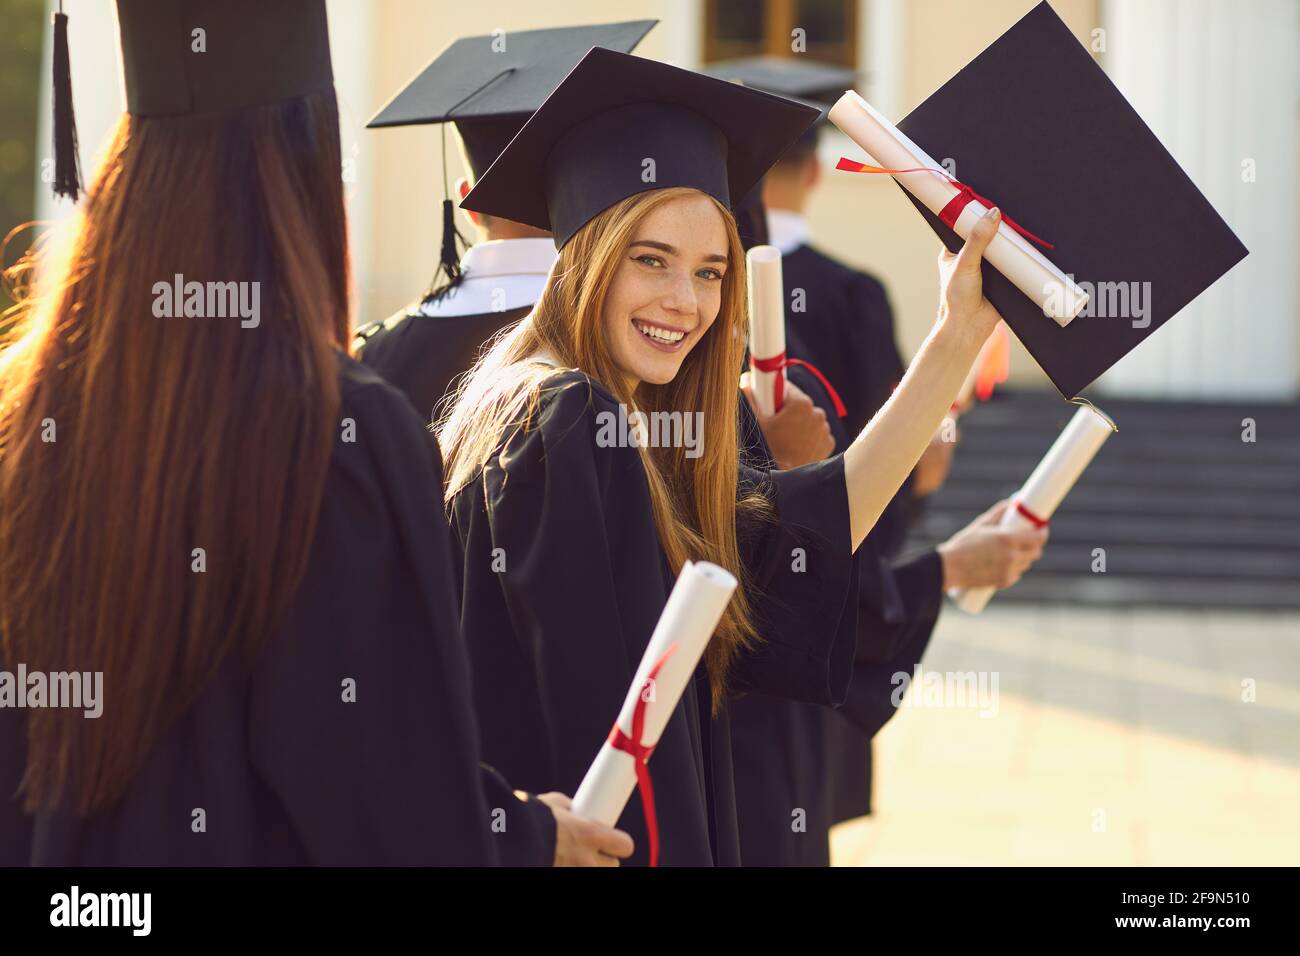 Smiling beautiful girl university or college graduate standing with diploma and looking at camera Stock Photo